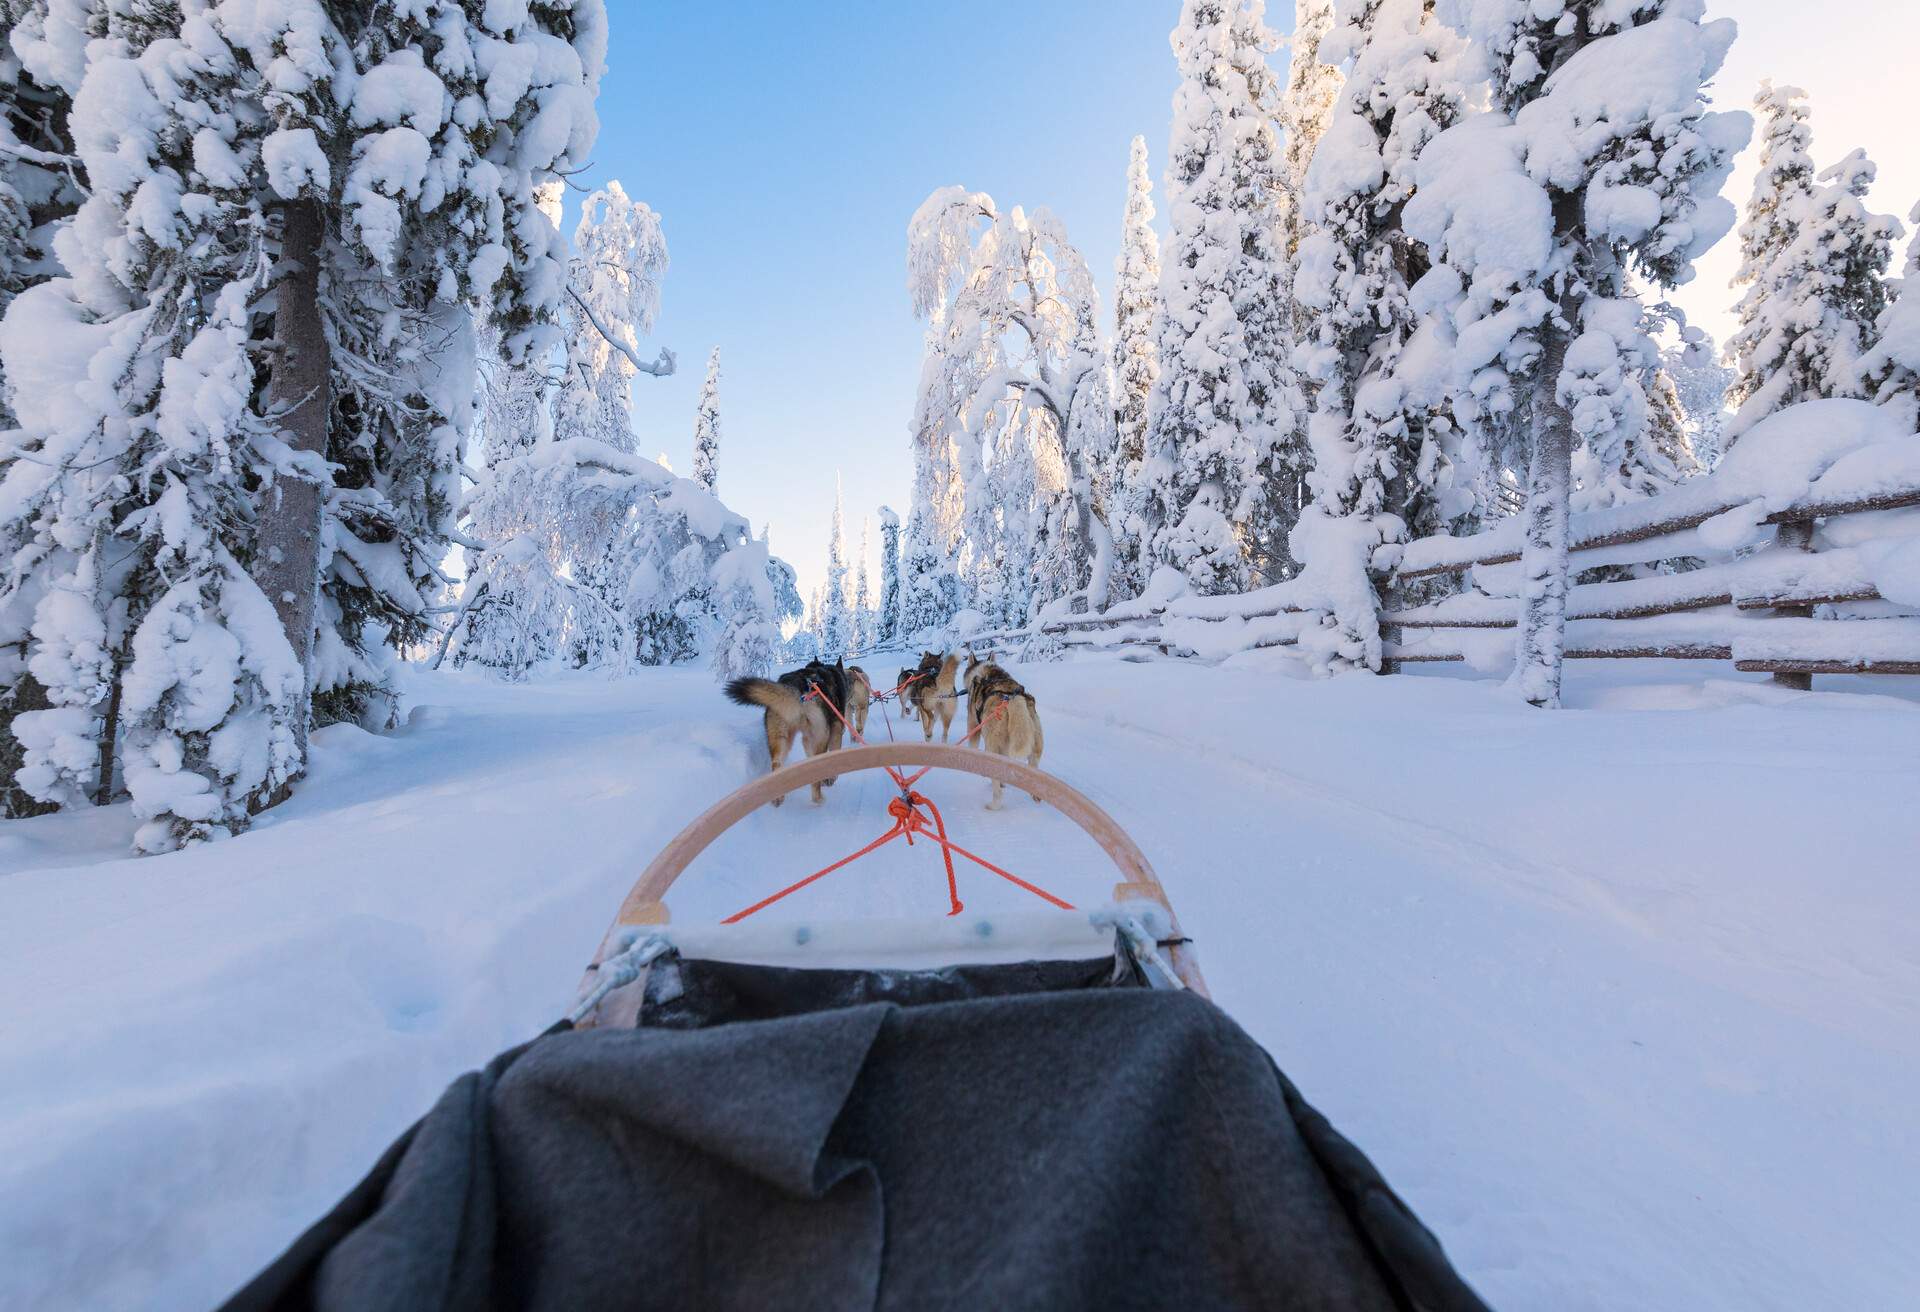 Perspective view of a person on a sledge being dragged by dogs on a snow-covered land surrounded by frosted trees.